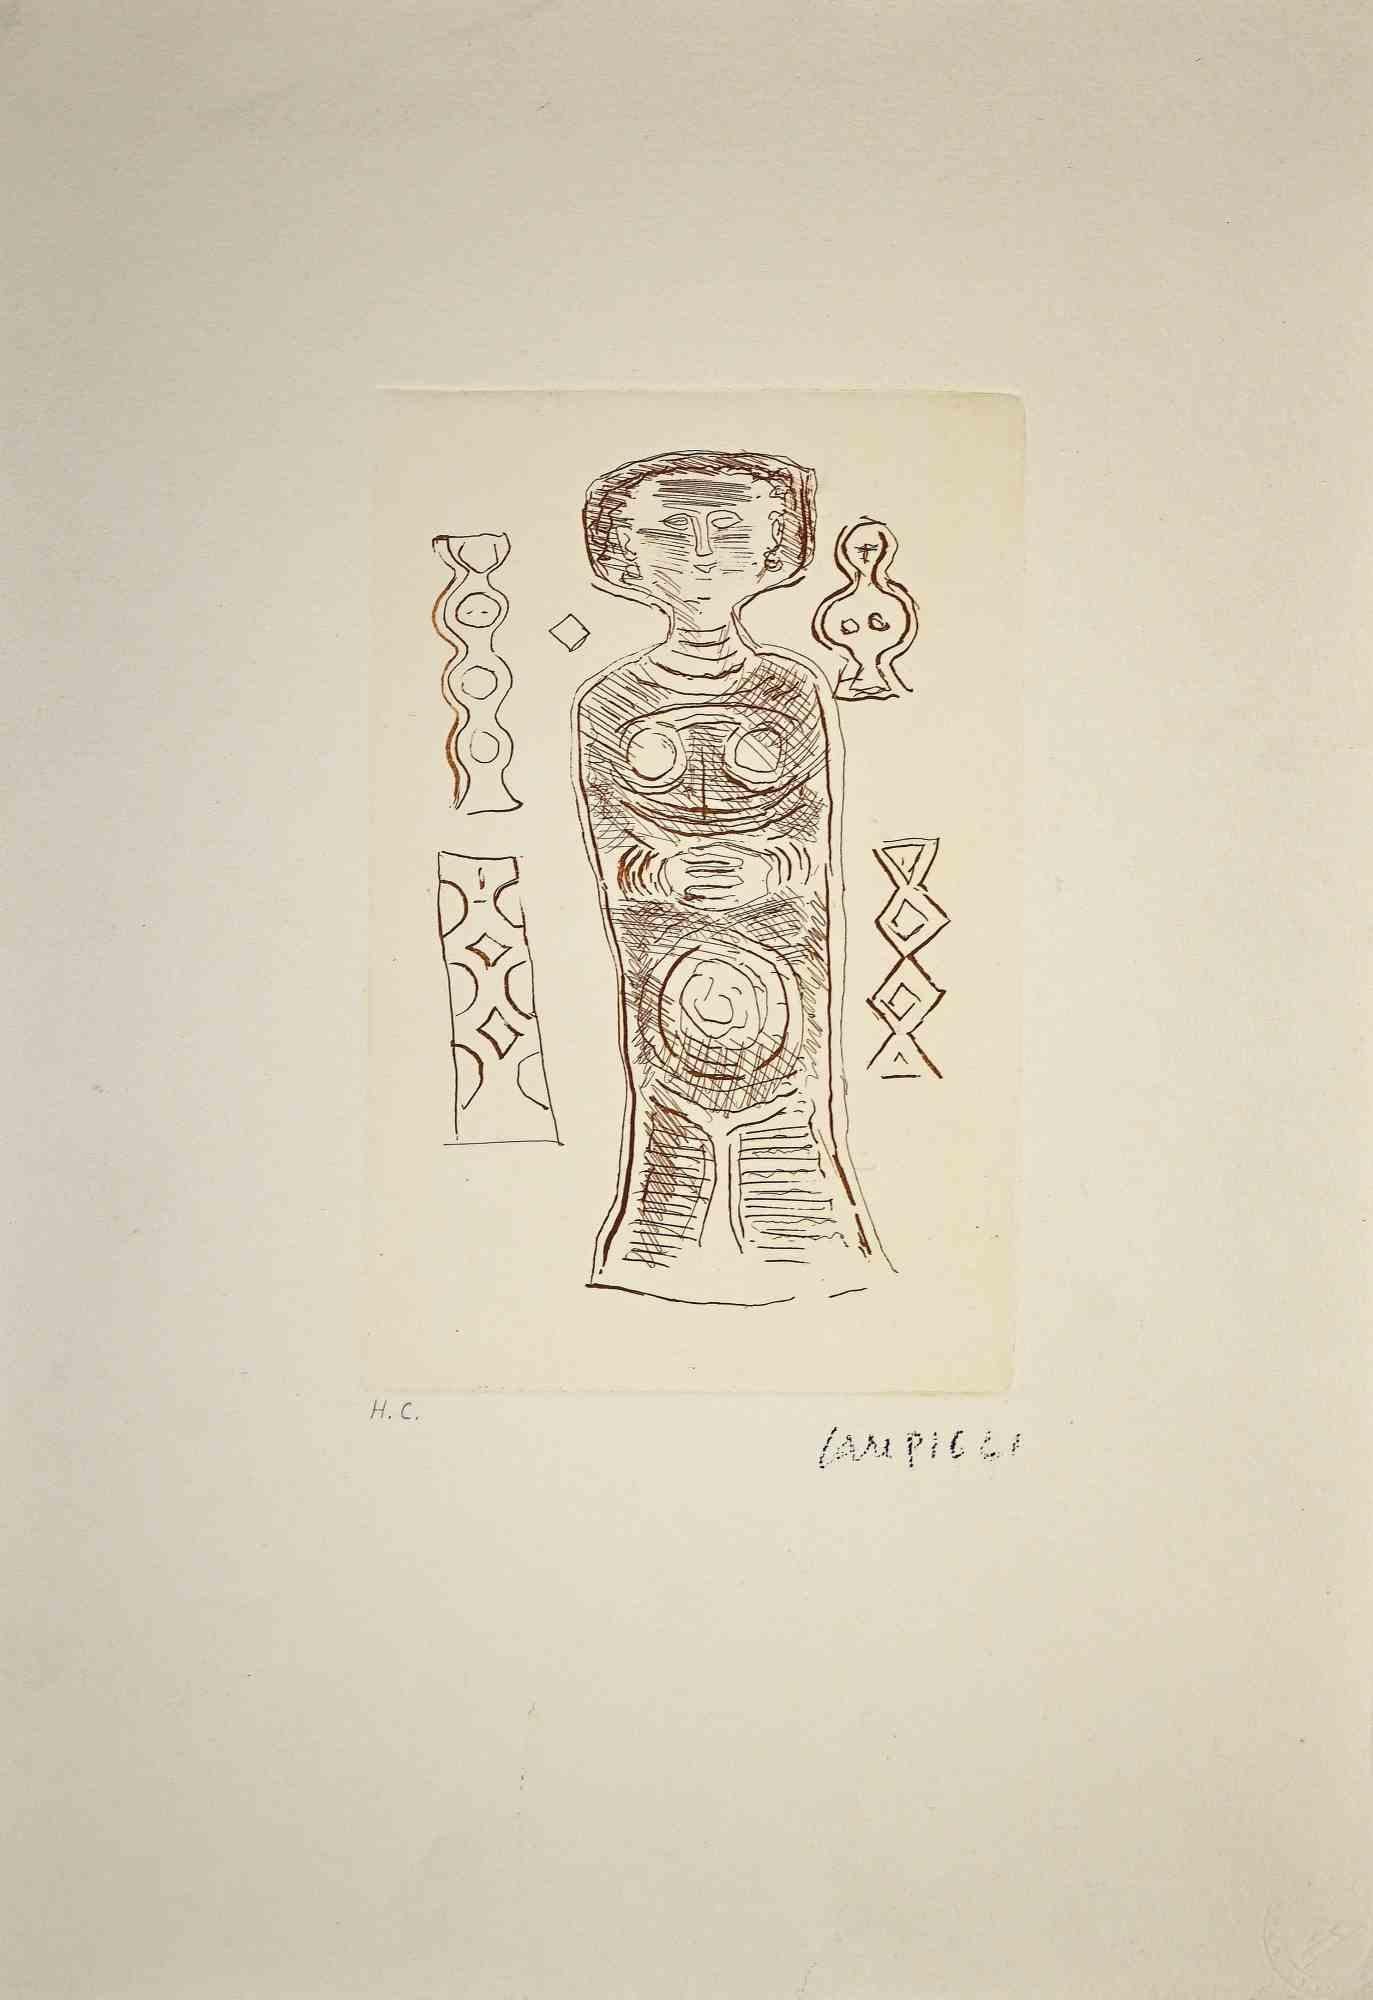 The idol  is an original print realized by Massimo Campigli in the 1970/1971s.

Etching on paper.

This artwork it is part of a series of works created in the last period of the artist and printed at the turn of the year of his death, which took